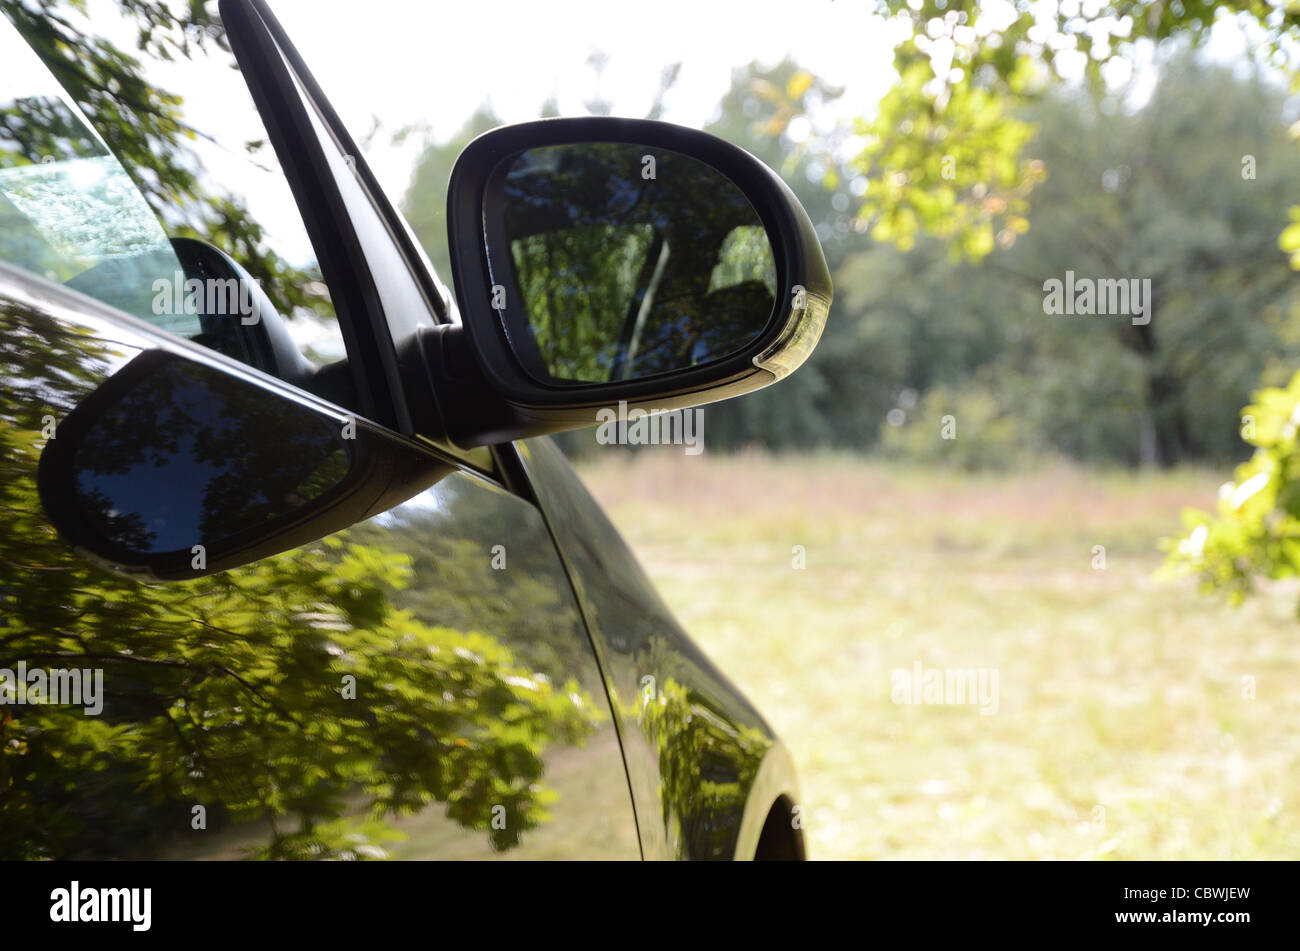 Car with reflections of green trees in sunny lawn. Stock Photo